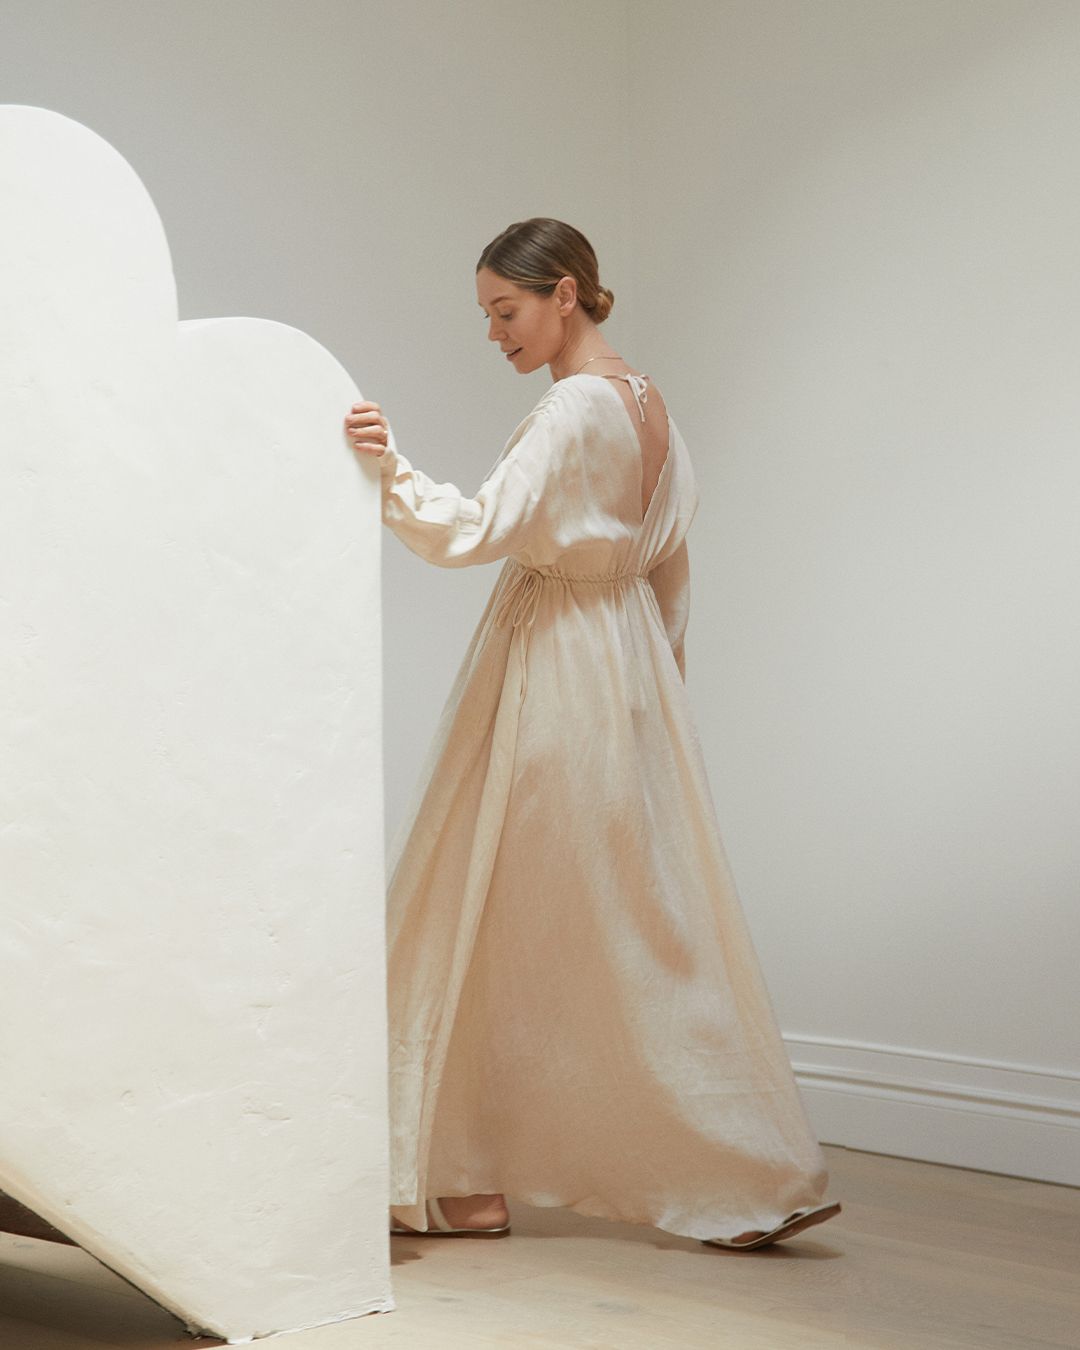 Hayley Bonham with hair in a sleek bun walking away up the stairs wearing a long maxi dress in neutral colourway